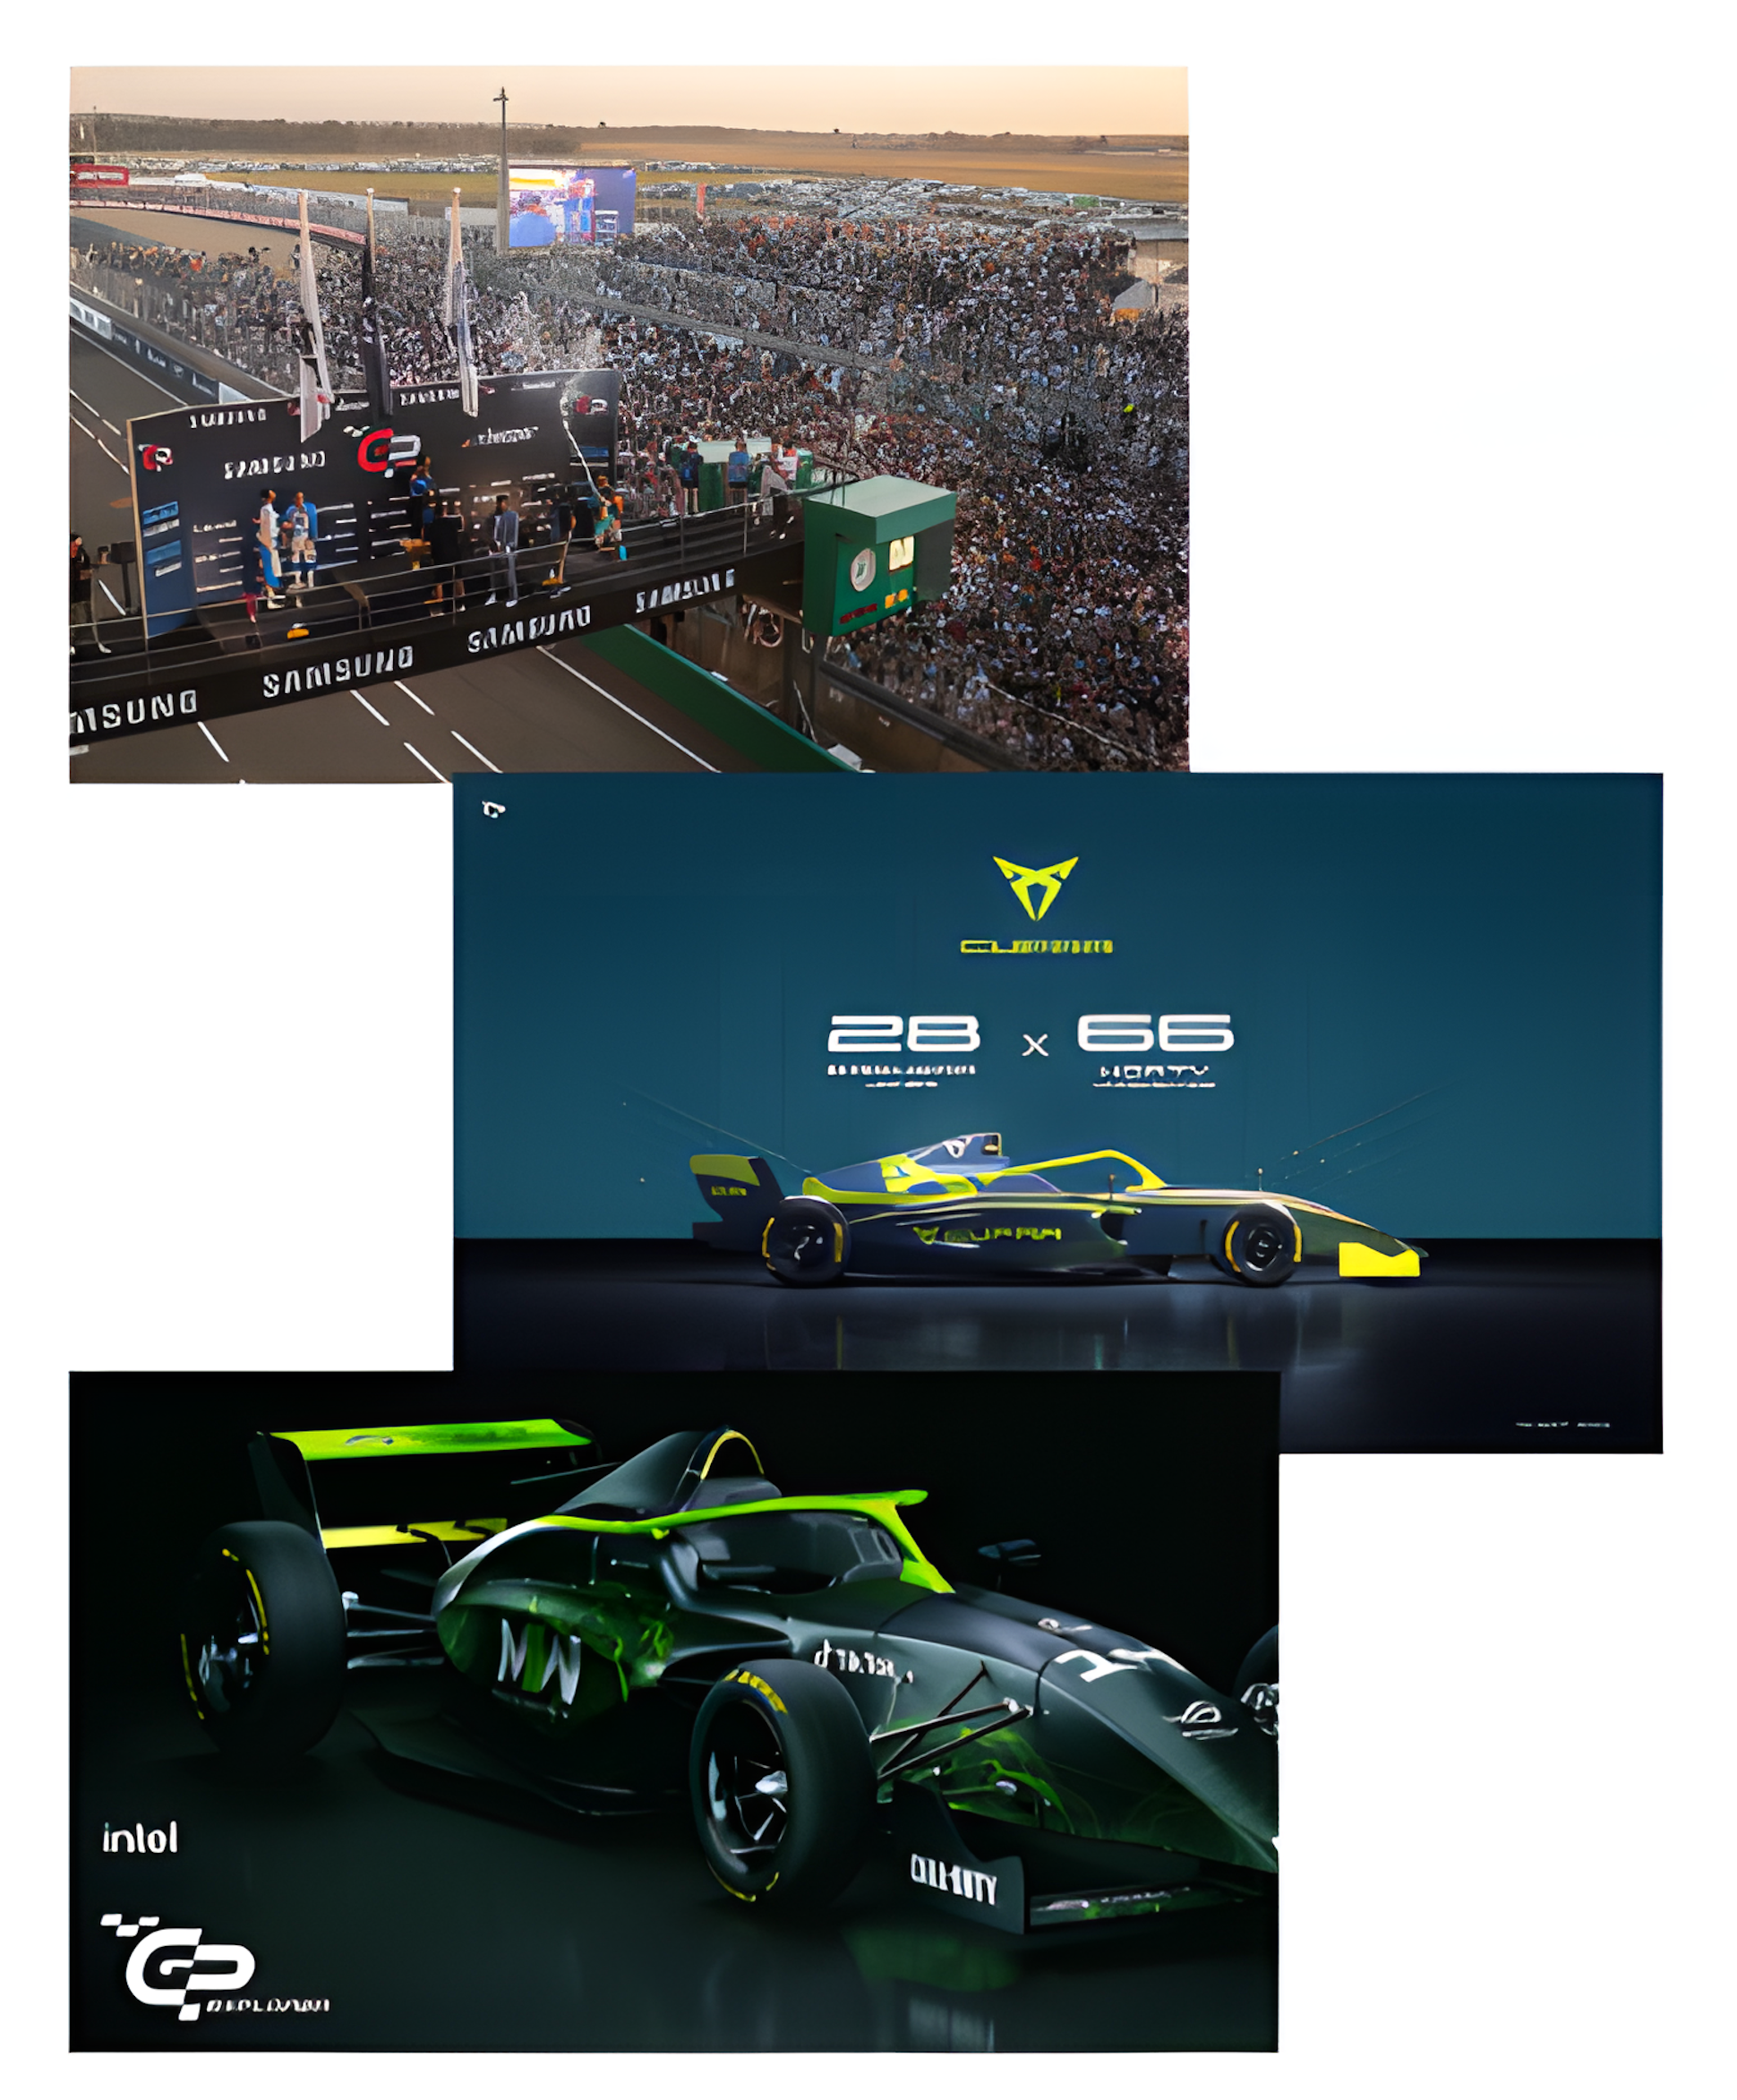 Top Image: Shows a crowded grandstand and racing circuit during an awards ceremony. Several drivers stand on a podium in front of banners with logos, including Samsung, while spectators fill the area. Middle Image: Displays a digital rendering of a sleek racing car in yellow and black, labeled with the logos "CLUBS21" and "28 x 66." Bottom Image: Offers another digital rendering of a racing car, this time in green and black, with prominent logos like "INLOL" and "CLUBS21." The car is presented at an angle to showcase its detailed design.